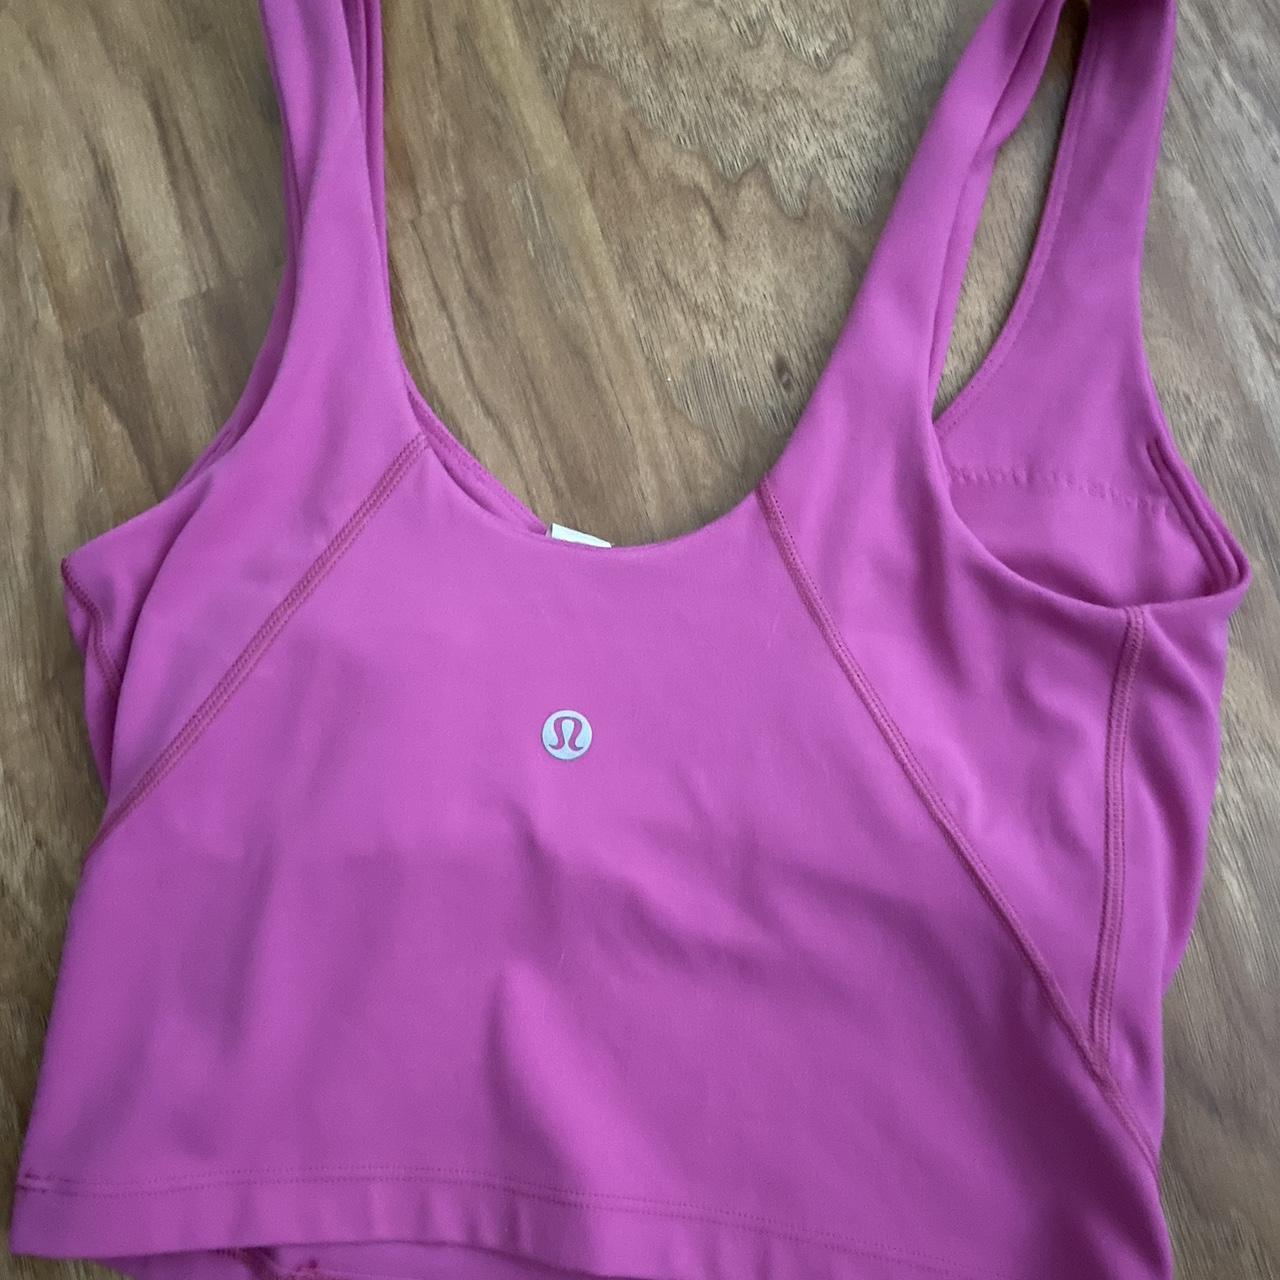 Sonic pink align tank size 4 TRADES ONLY! do not - Depop